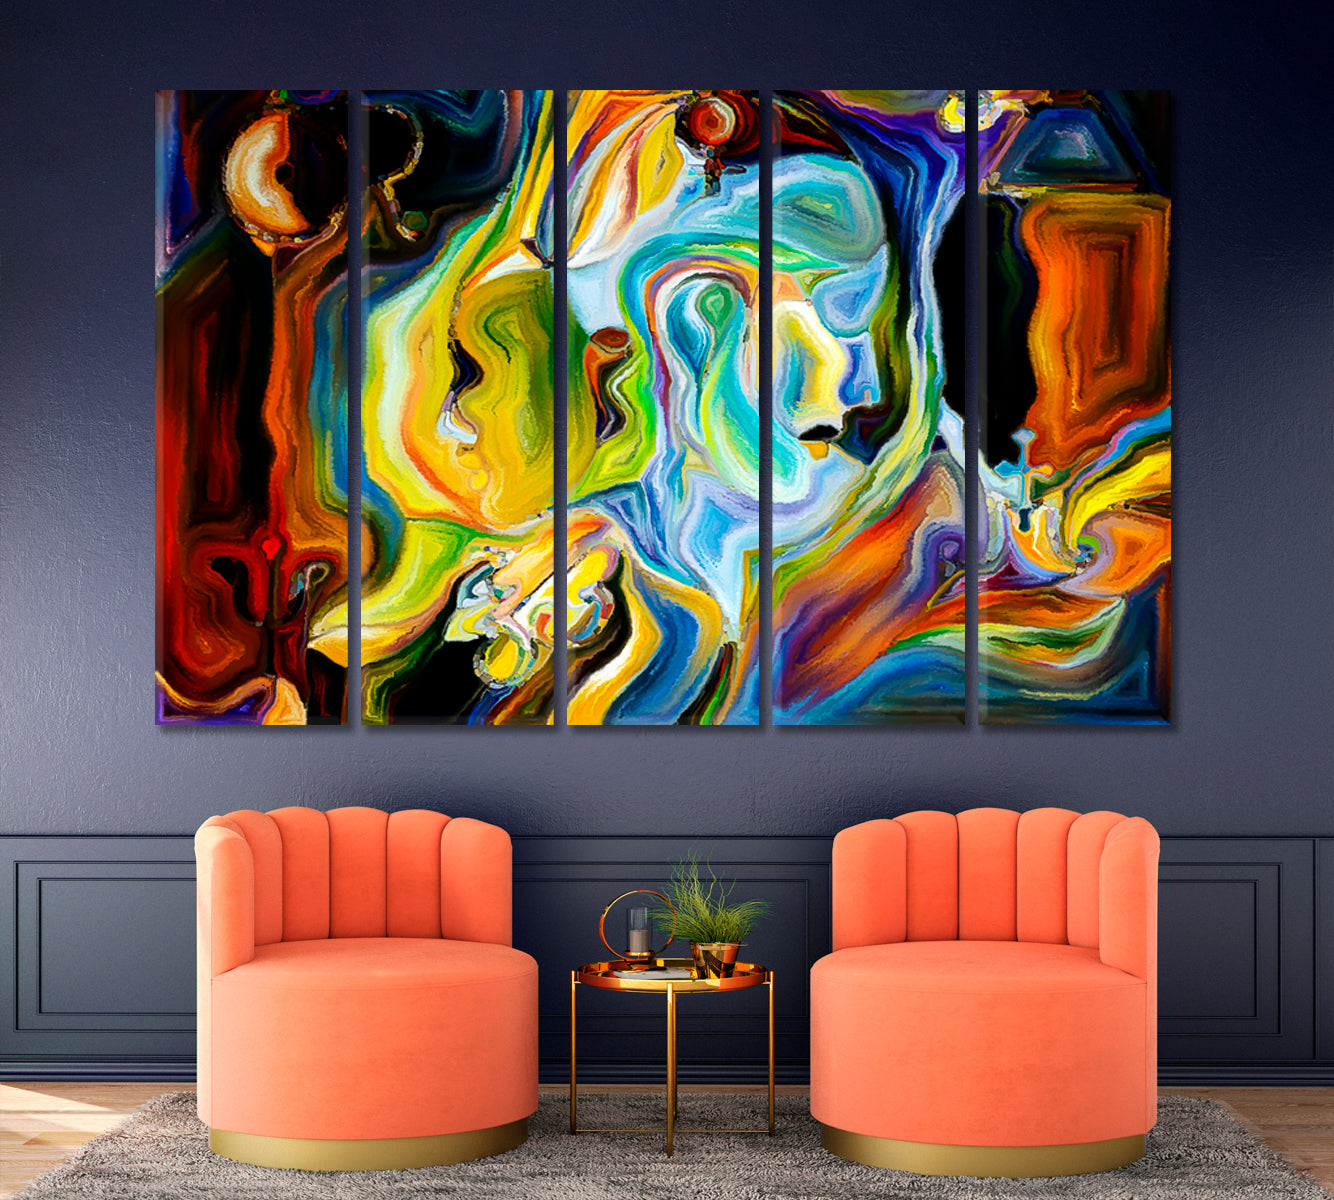 Behind Consciousness. Surreal World Of Colors And Curves Contemporary Art Artesty 5 panels 36" x 24" 